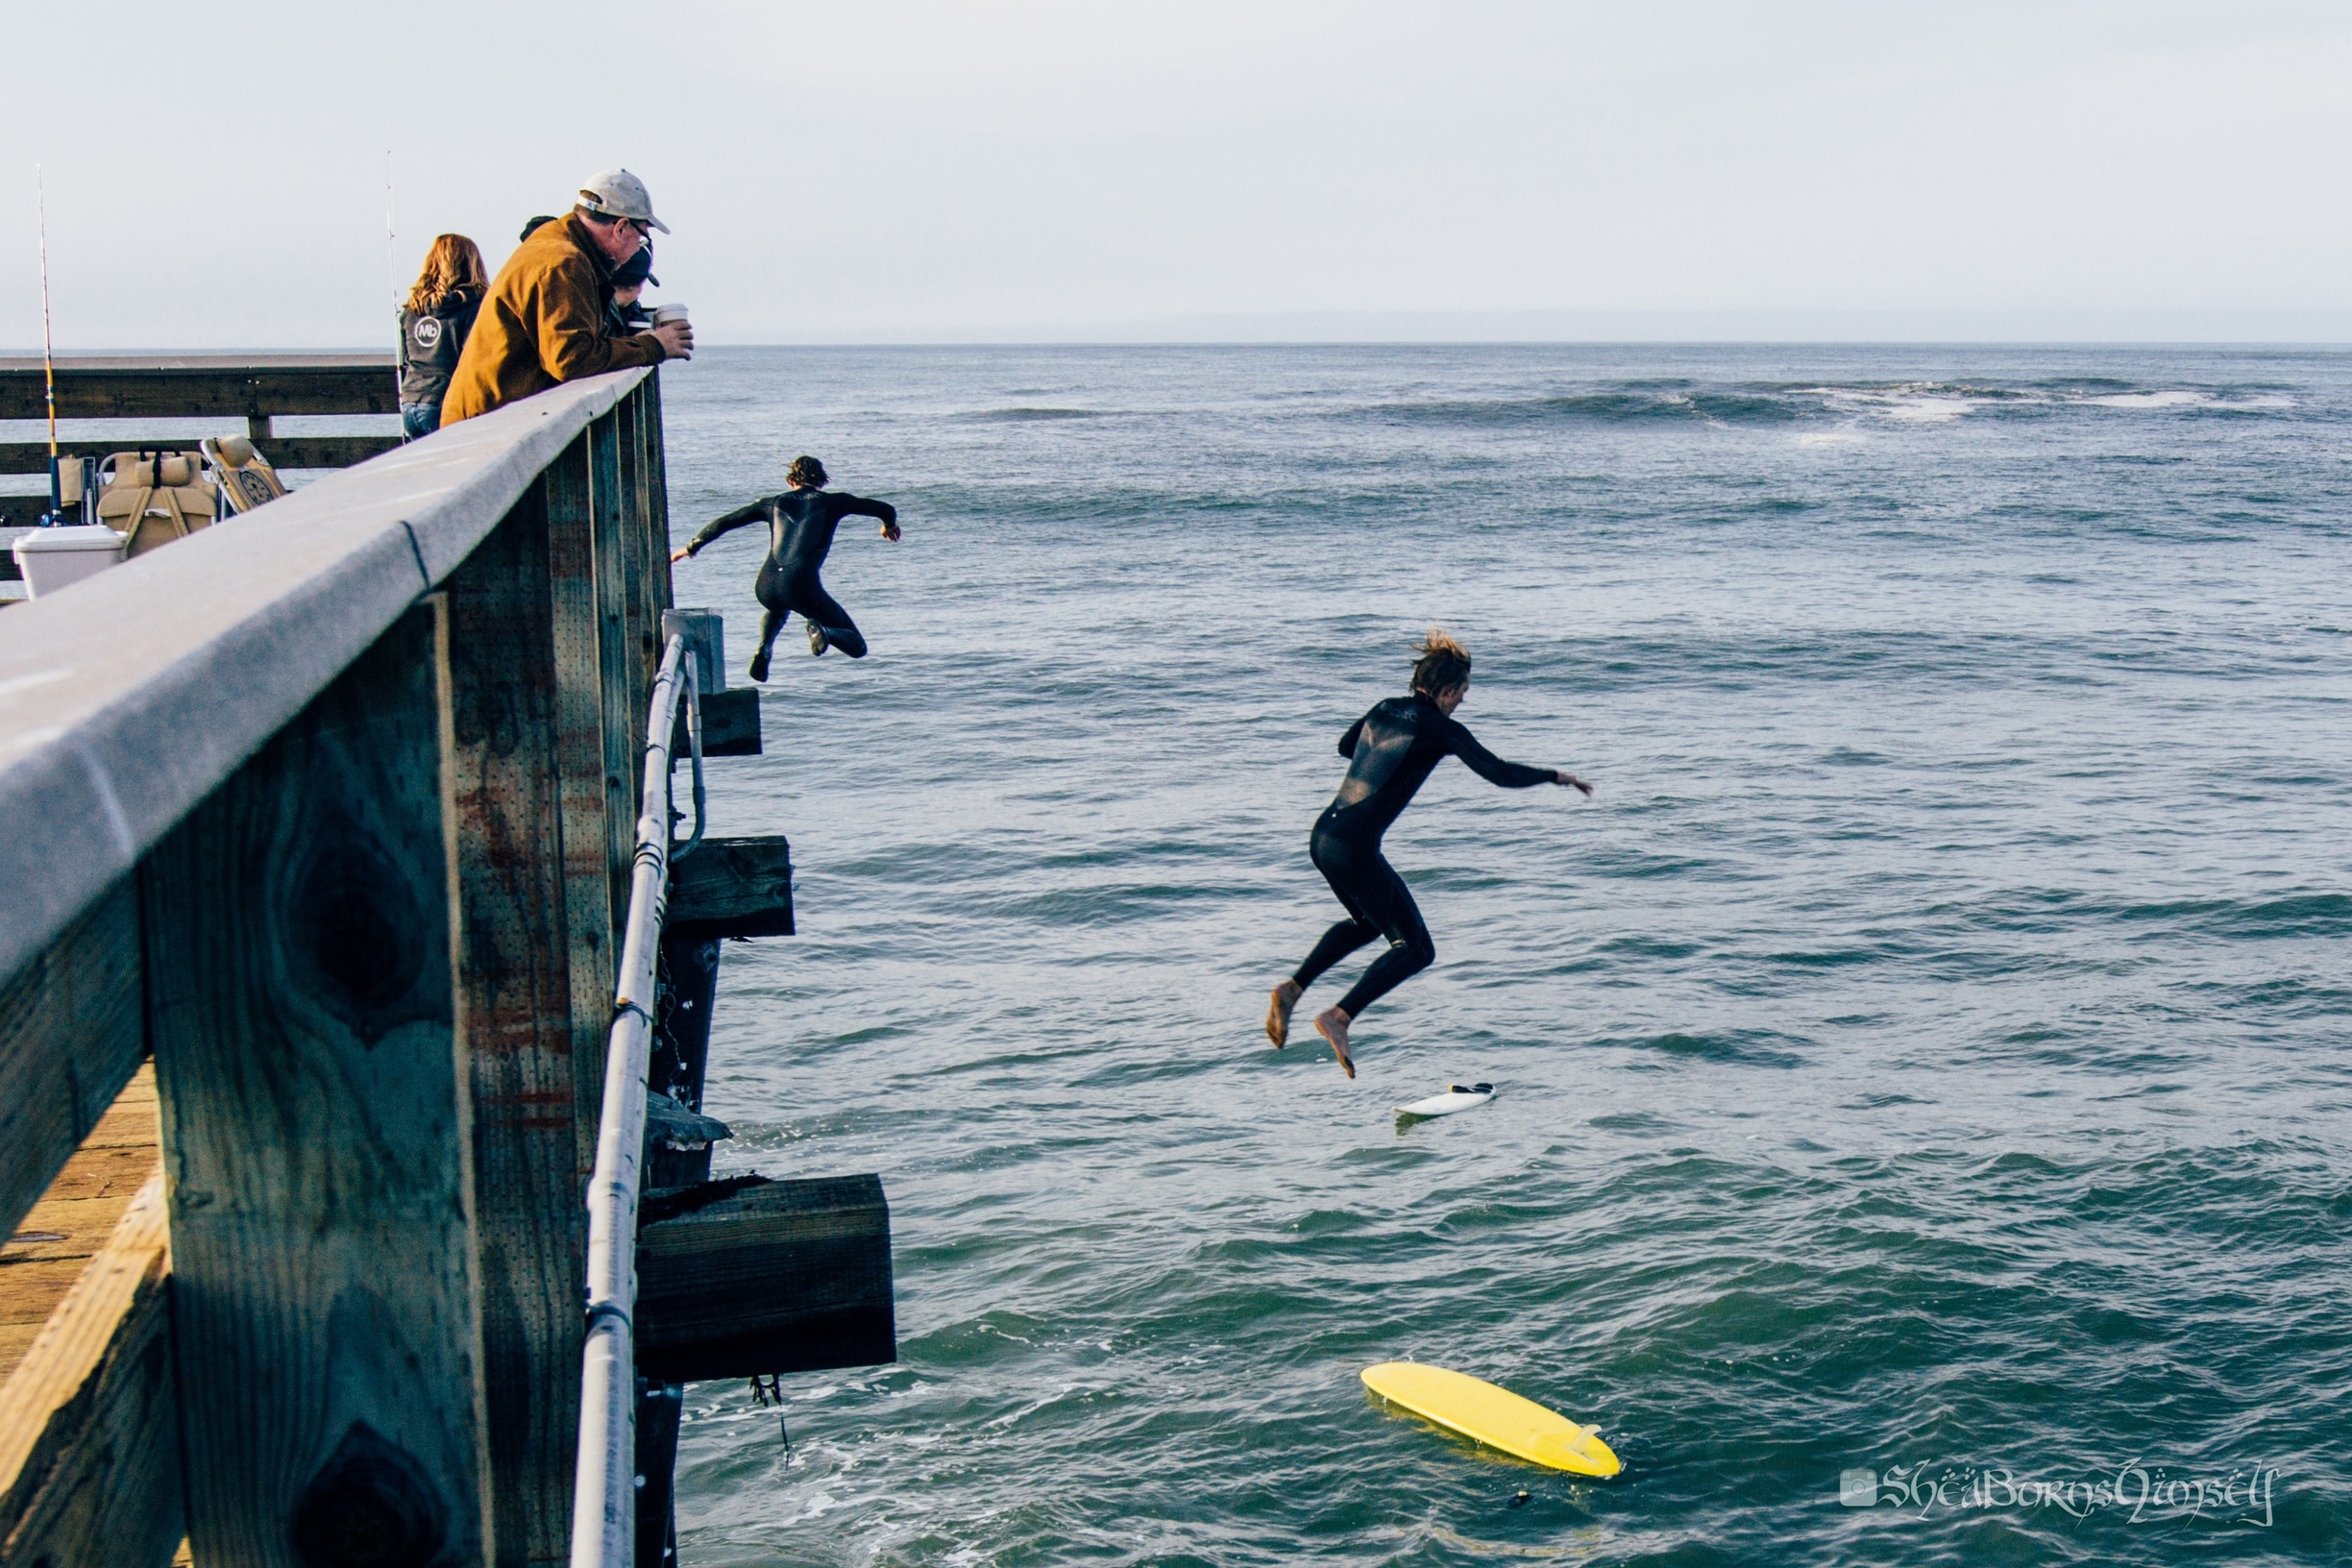 Surfers jumping off the pier.